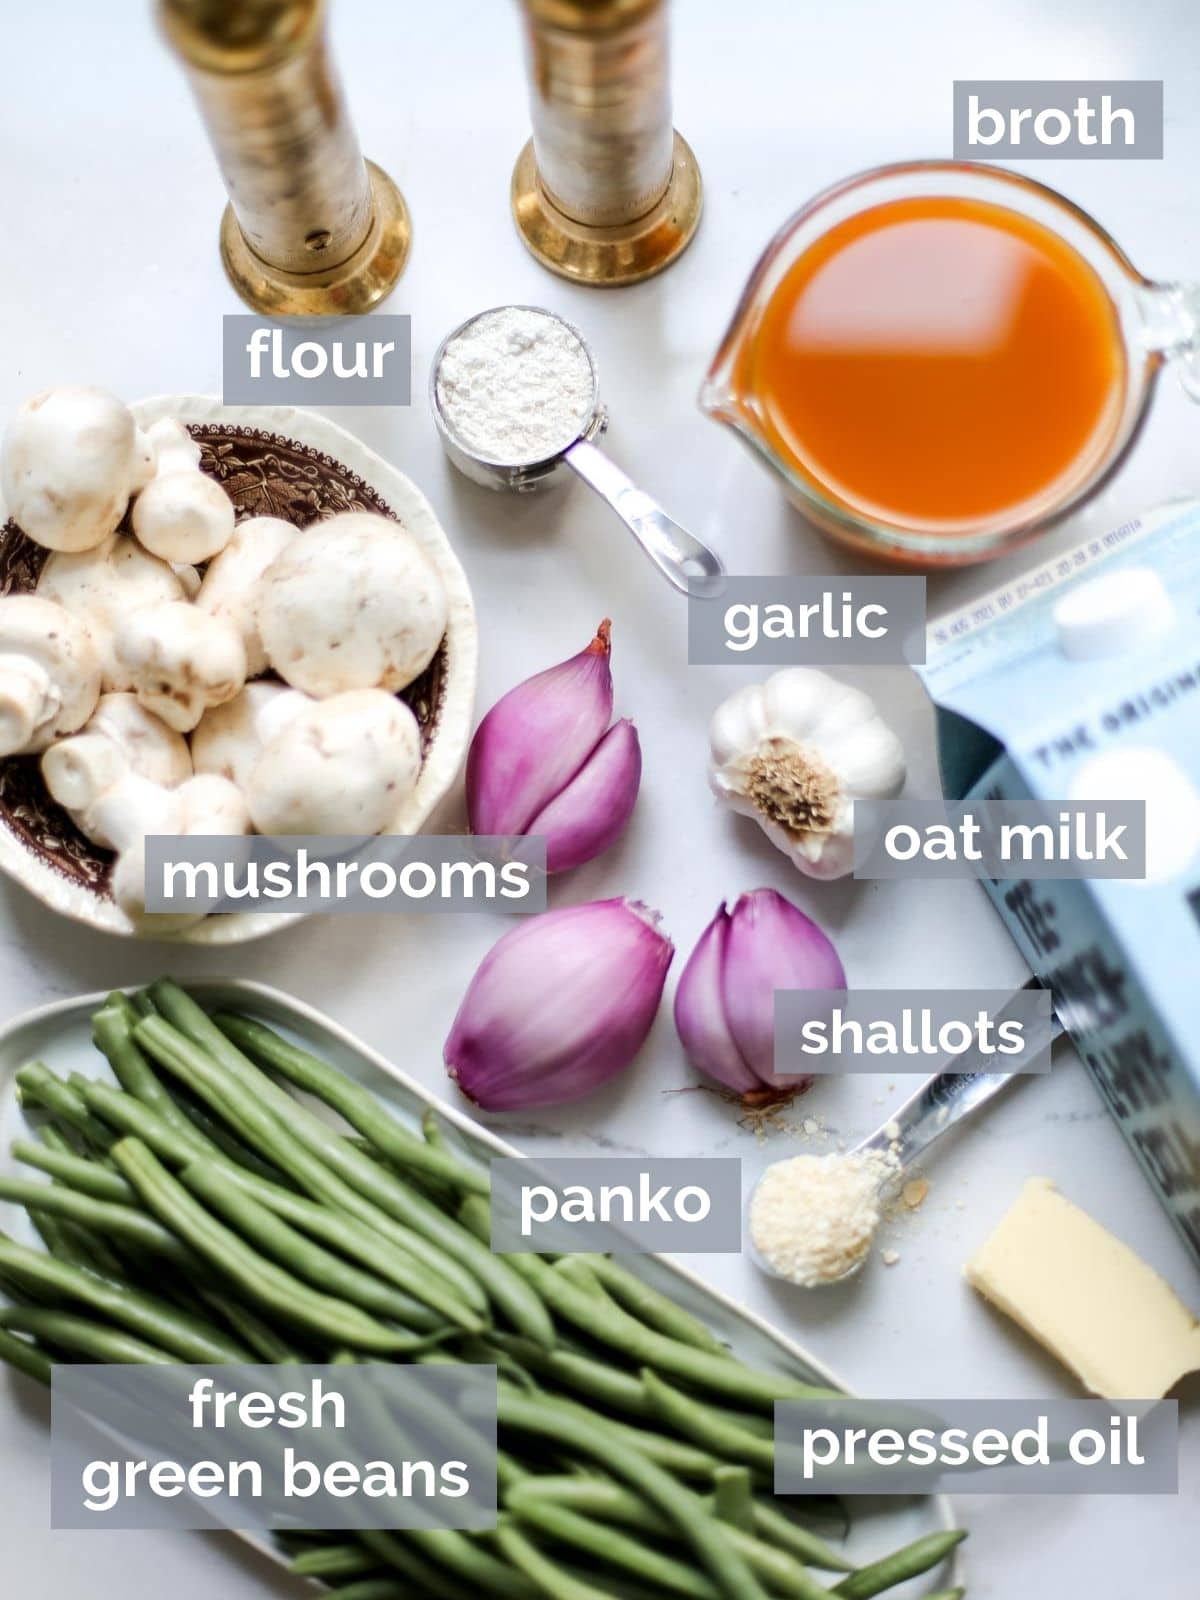 Green beans, mushrooms, broth, shallots, milk, and seasonings on a white table